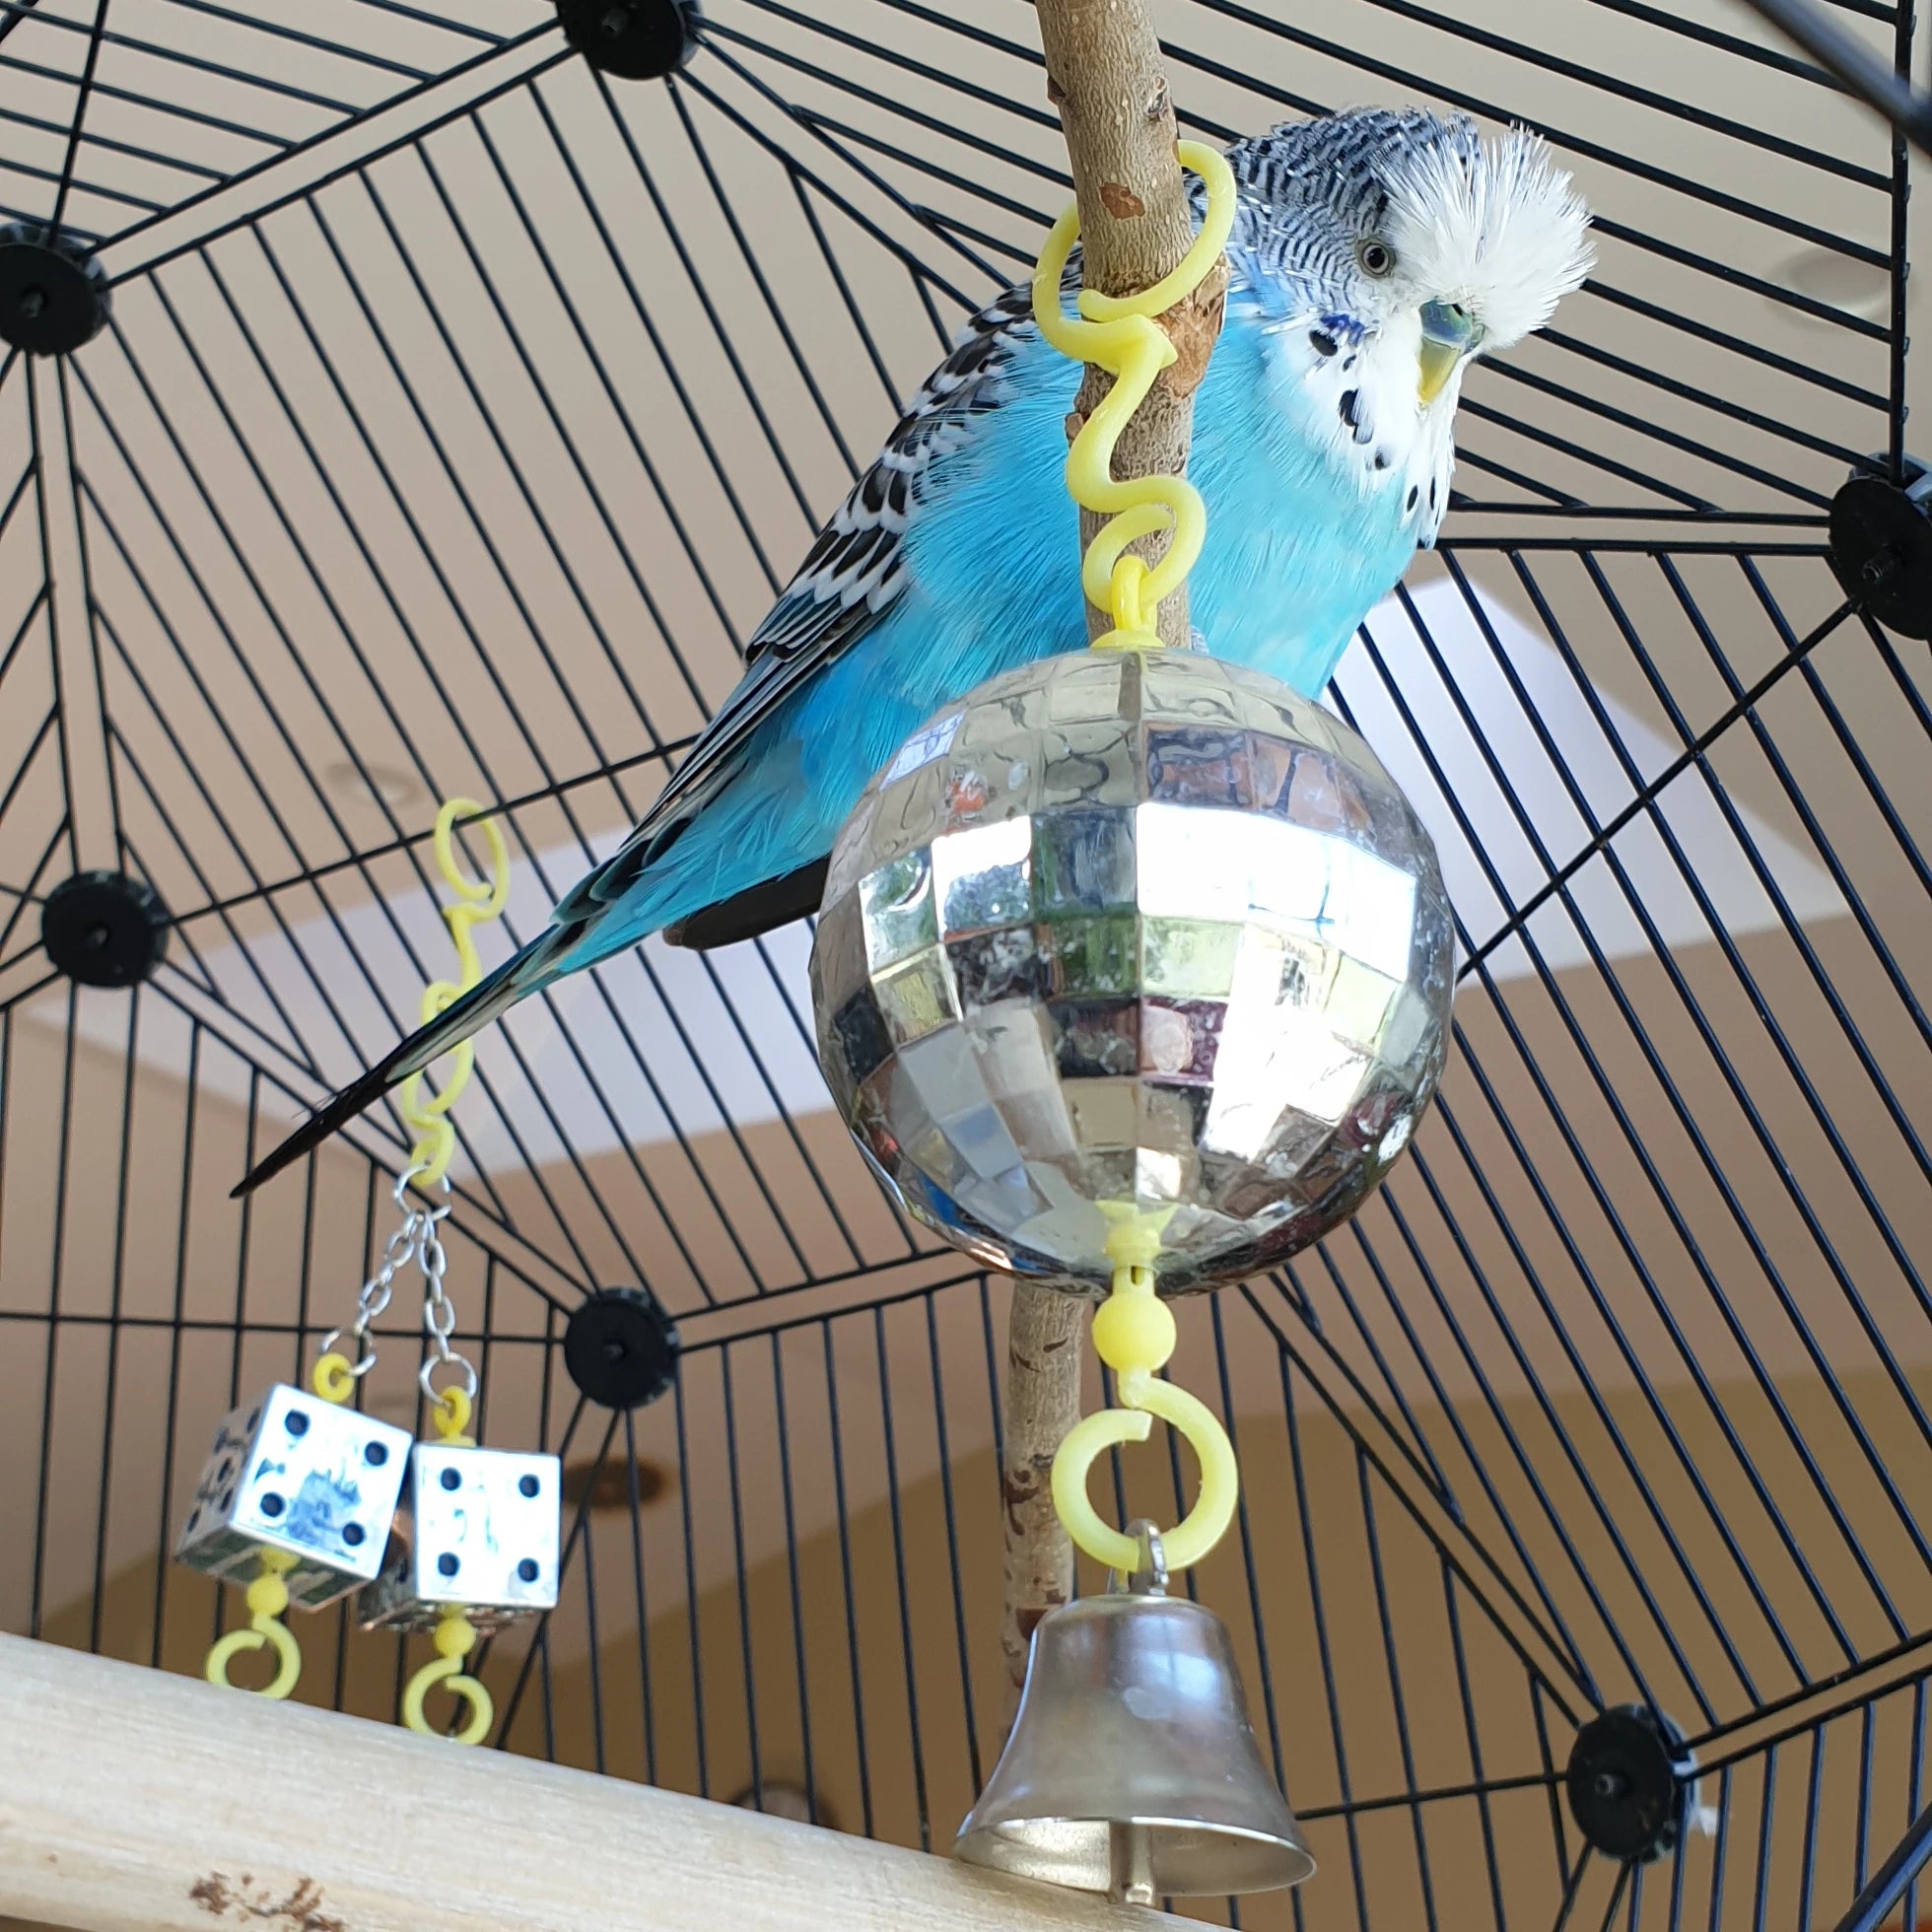 If your budgies don’t like a new toy, take it away and reintroduce it a few days later